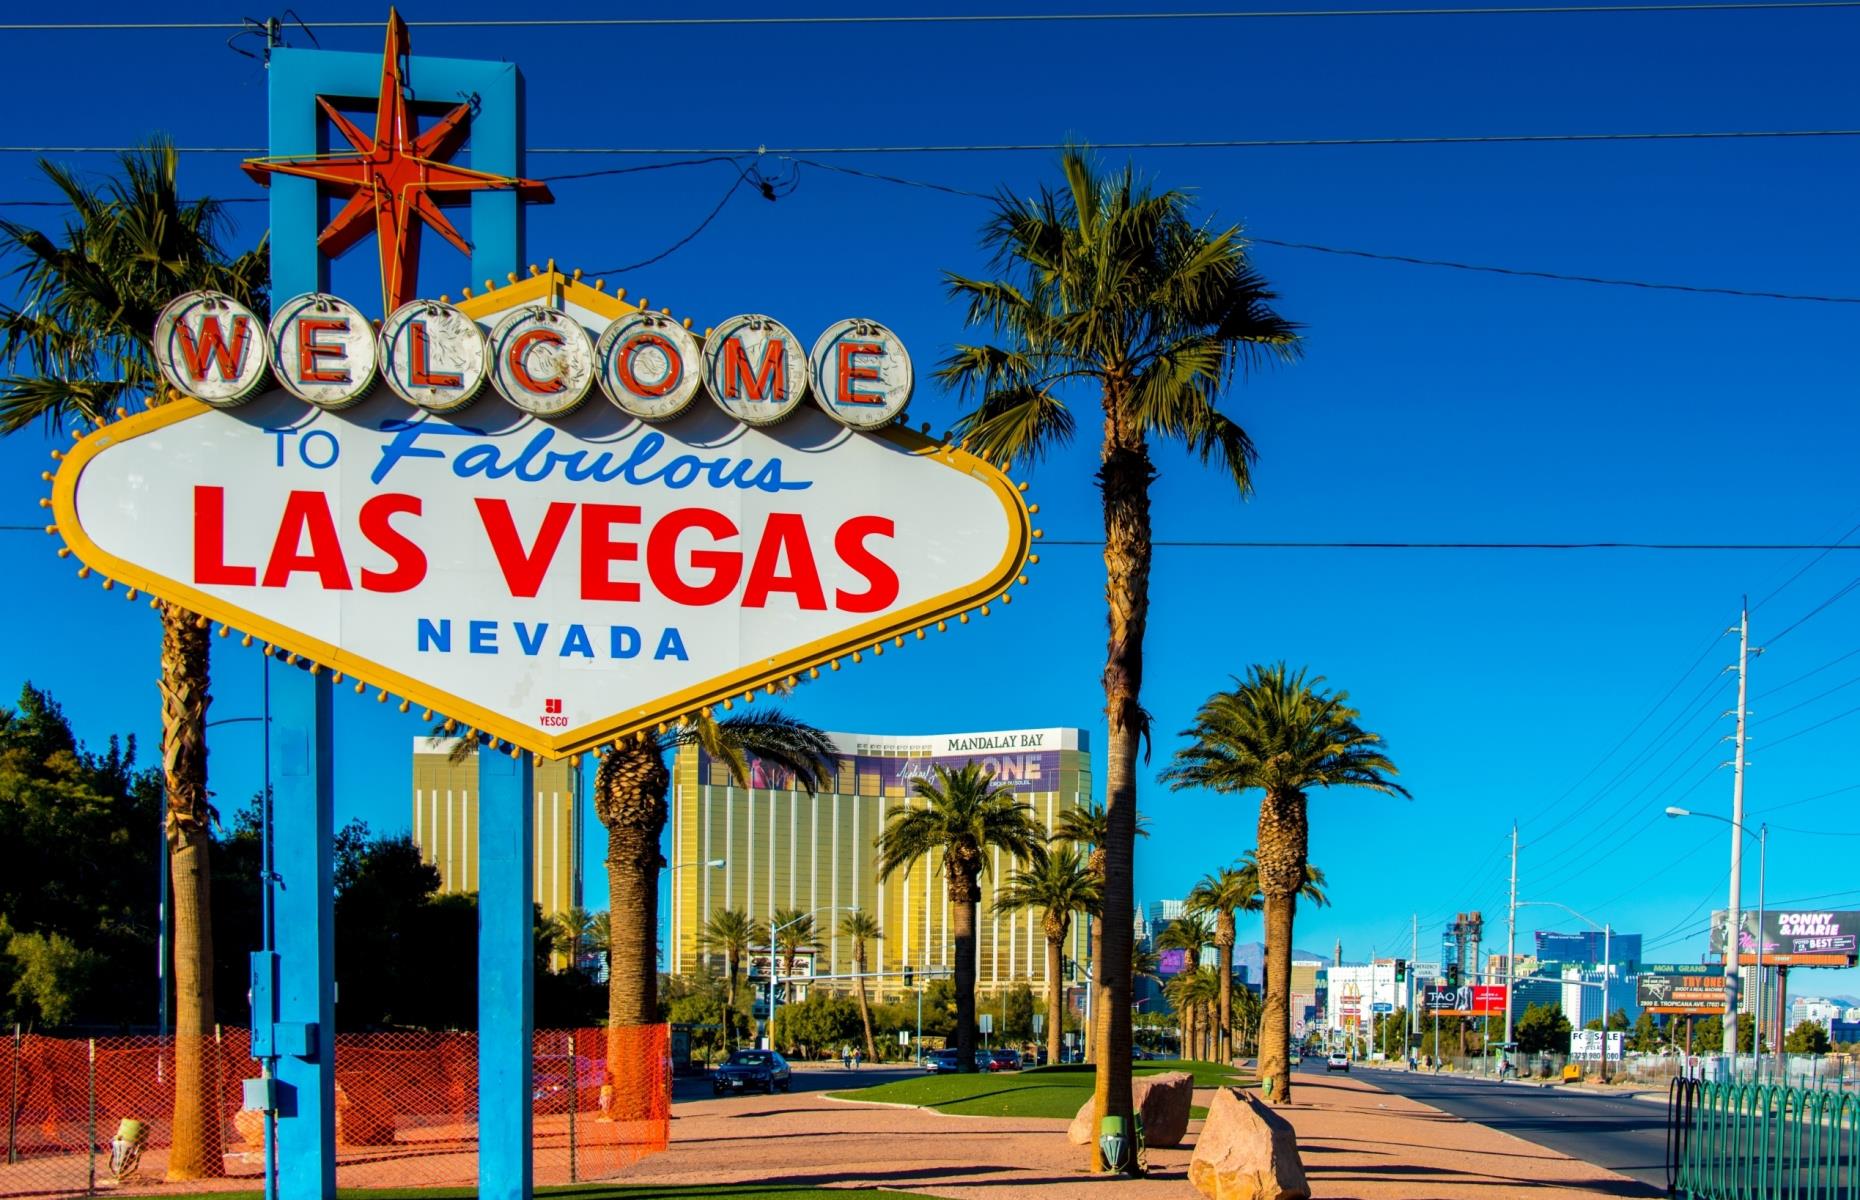 <p>One of <a href="https://www.neonmuseum.org/the-collection/blog/put-a-star-on-it">the most famous signs in America</a>, the iconic “Welcome to Fabulous Las Vegas” has sat on the southern end of Las Vegas Boulevard (AKA the Las Vegas strip) since 1959. The sign, designed by graphic designer Betty Willis, originally had a “middle of nowhere” feel to it, but the city has since grown up around it. A parking lot and walkway have also been installed to make it safer for tourists to take photos of themselves in front of the sign.</p>  <p><a href="https://www.loveexploring.com/gallerylist/99342/sin-city-secrets-the-incredible-story-of-las-vegas"><strong>Sin City secrets: the incredible story of Las Vegas</strong></a></p>